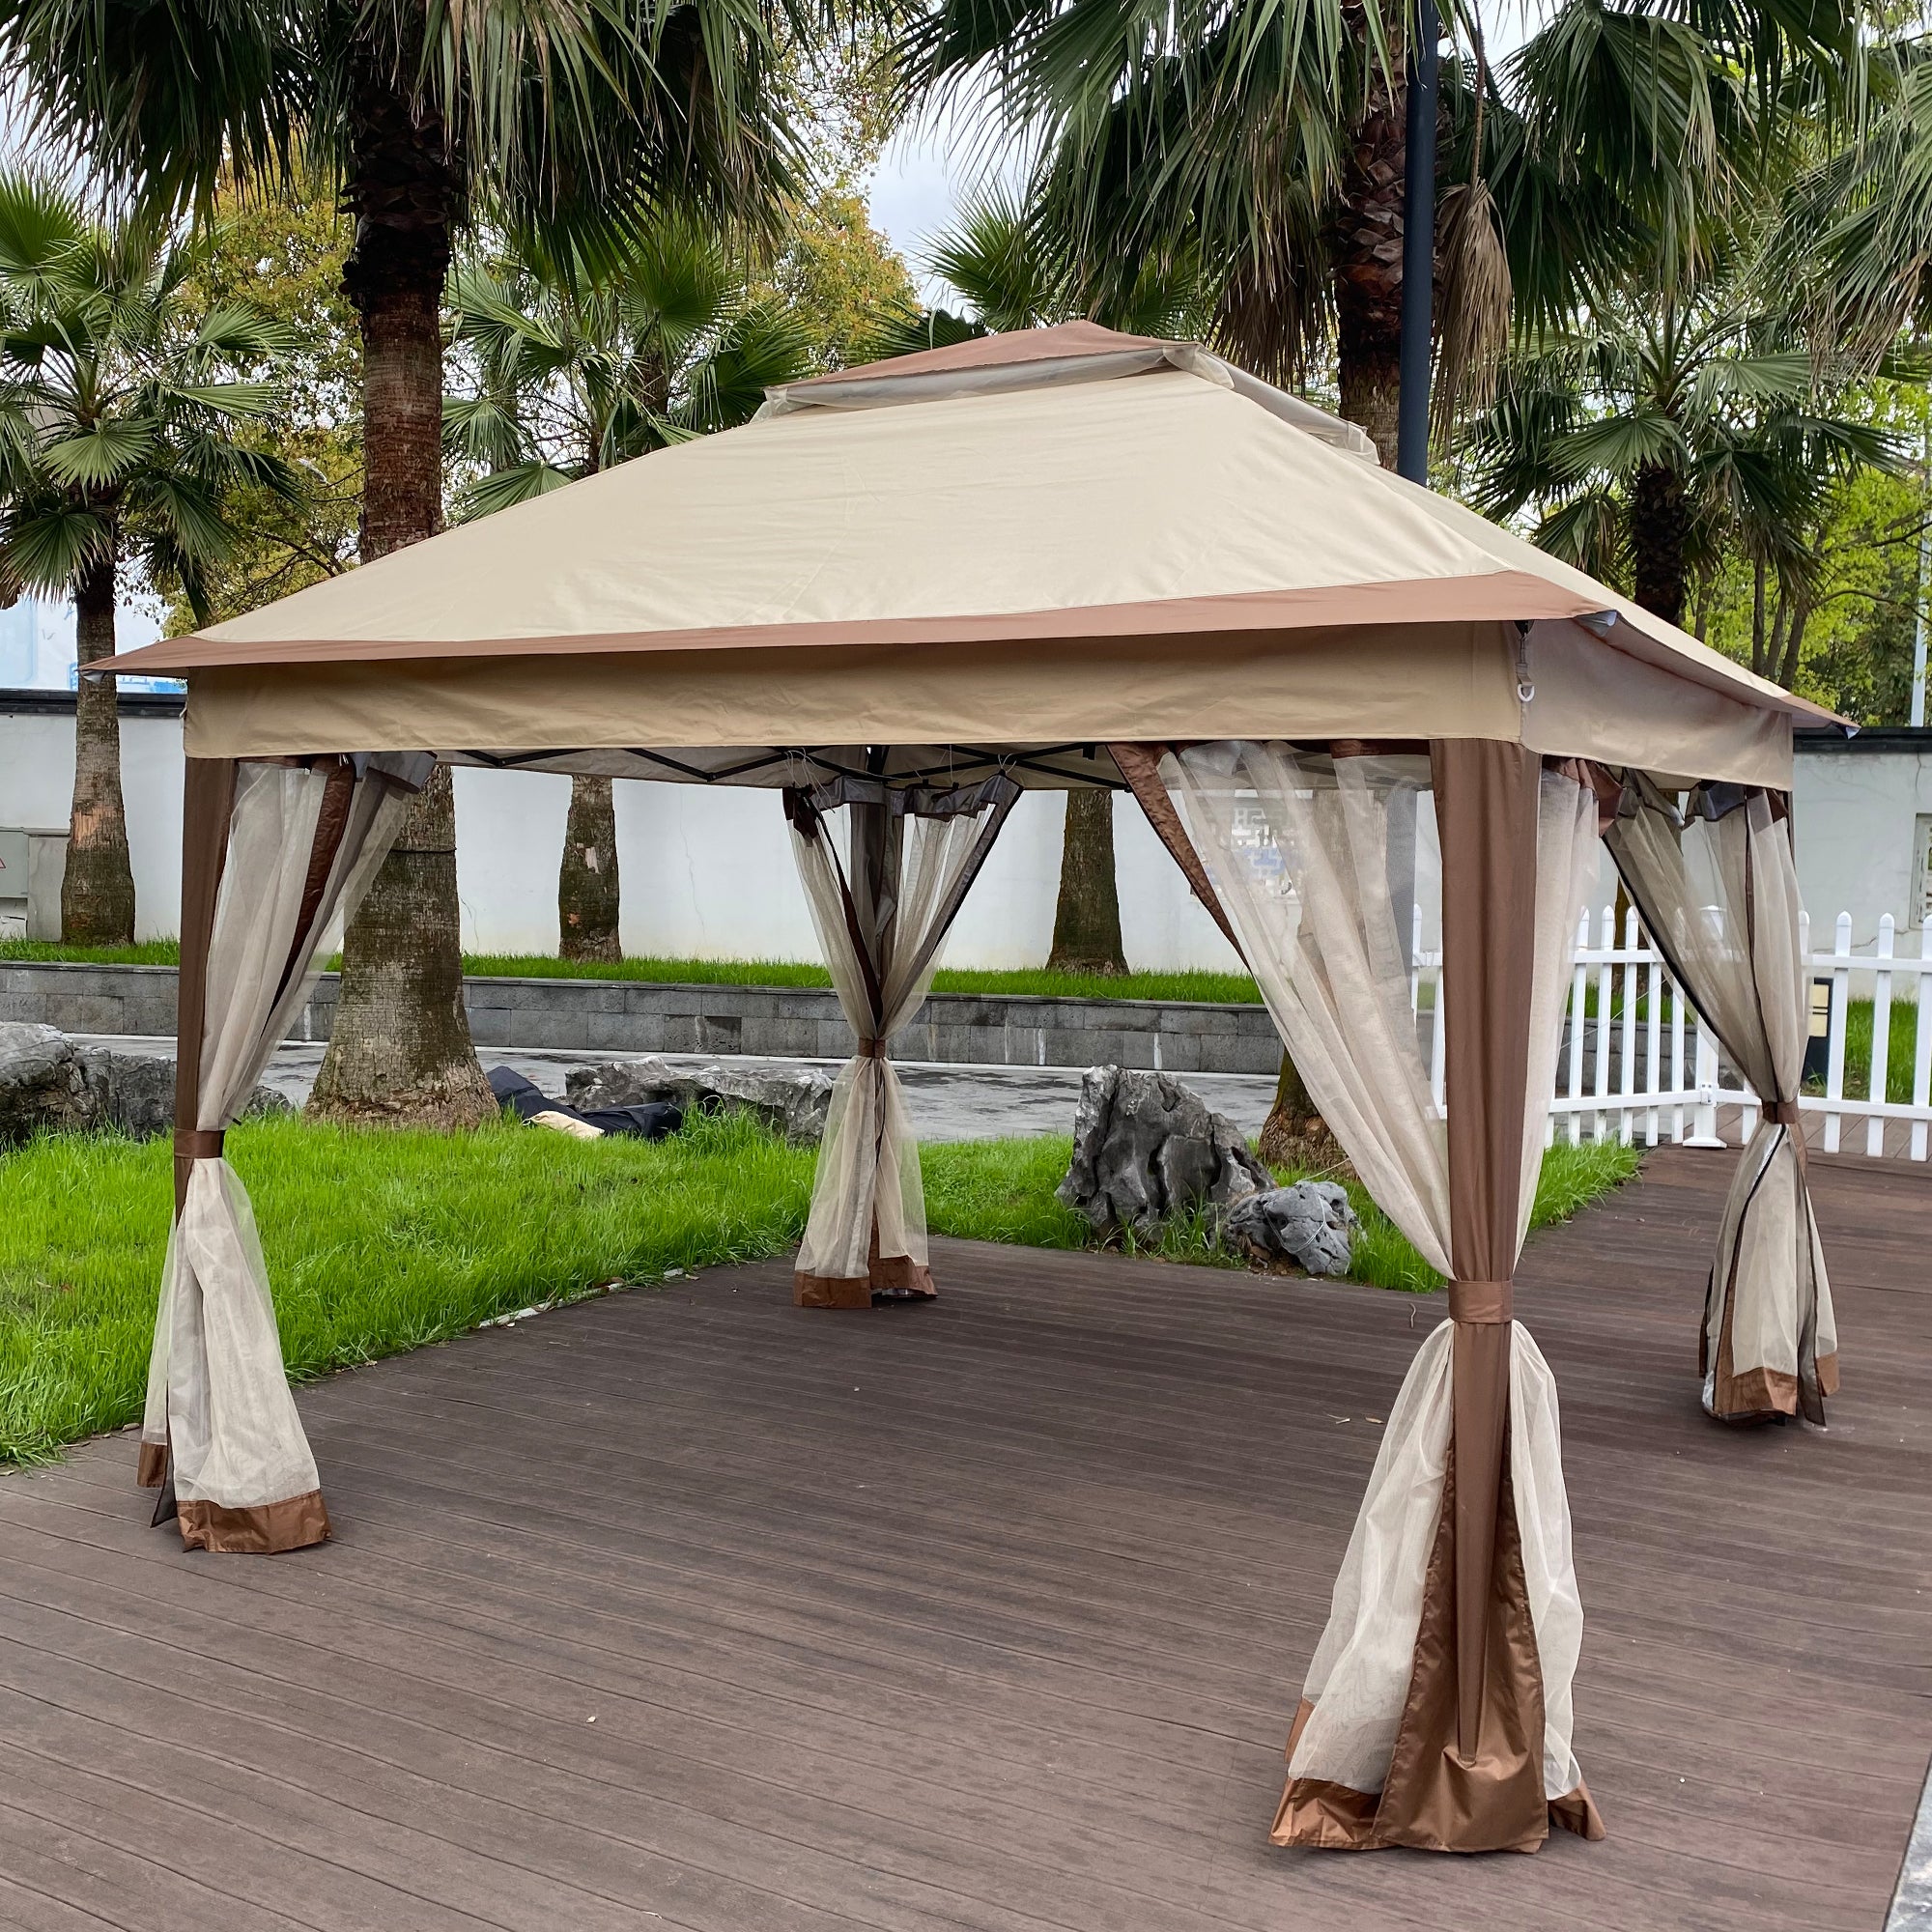 Outdoor 11x 11Ft Pop Up Gazebo Canopy With Removable Zipper Netting,2-Tier Soft Top Event Tent,Suitable For Patio Backyard Garden Camping Area,Coffee